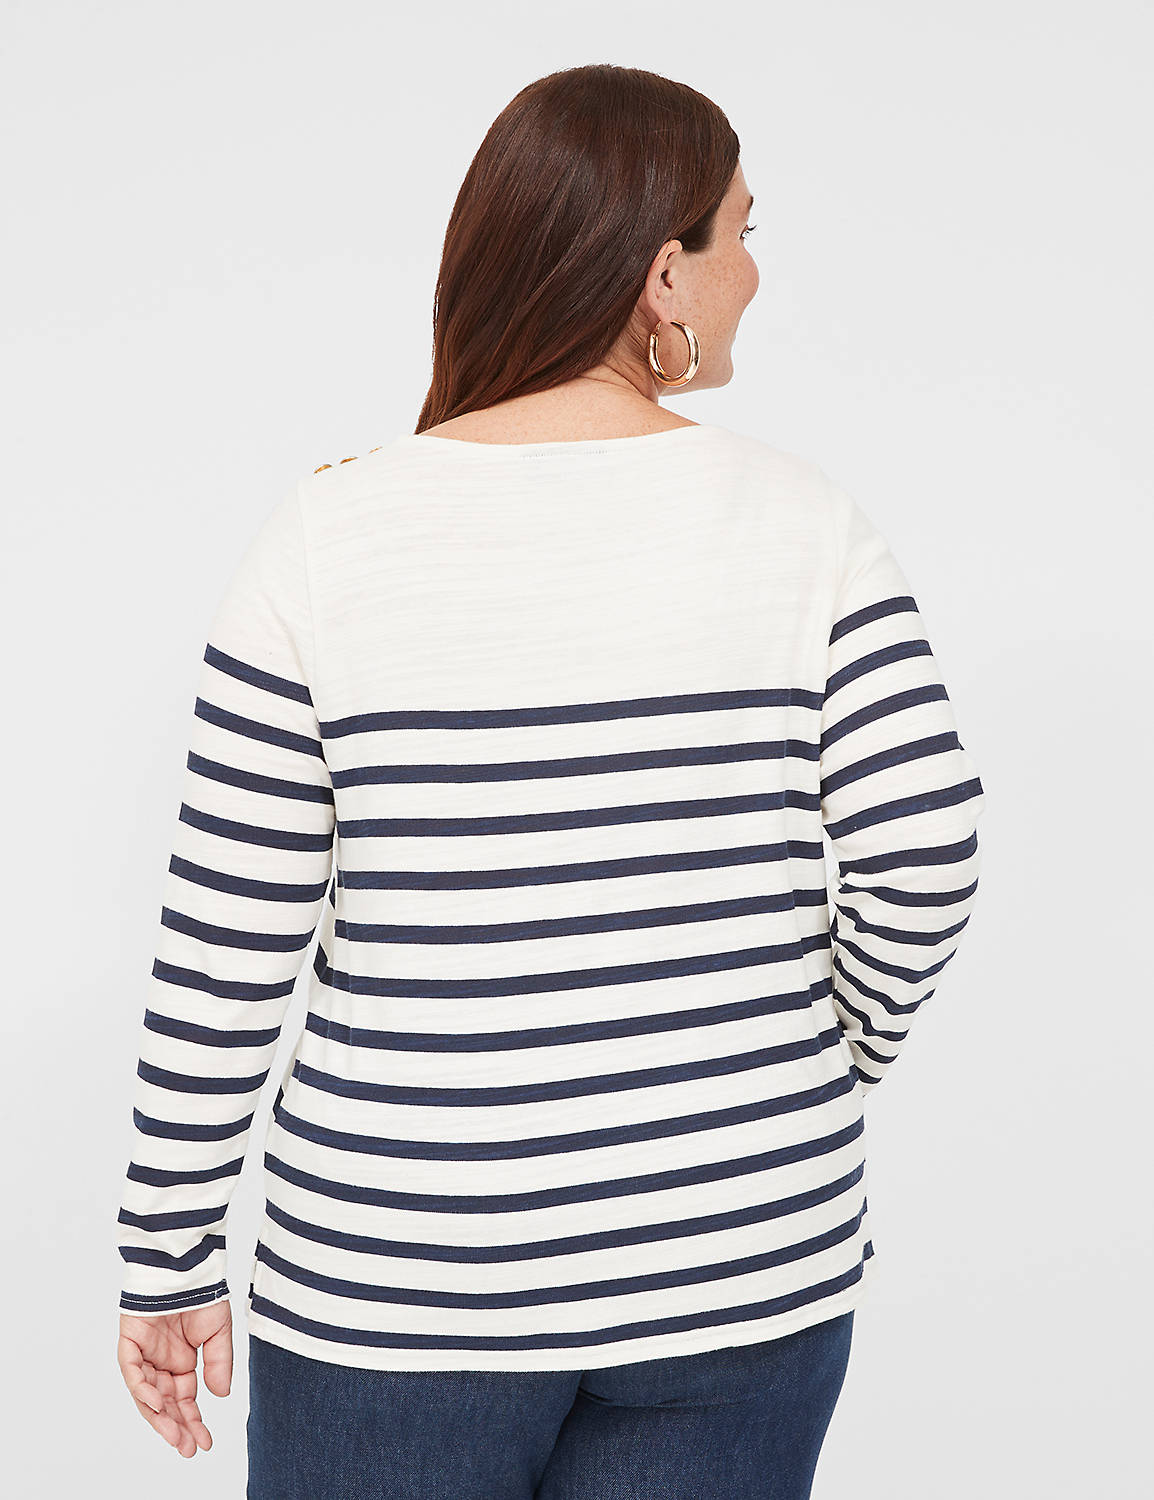 Classic Long Sleeve Boatneck Top 11 Product Image 2